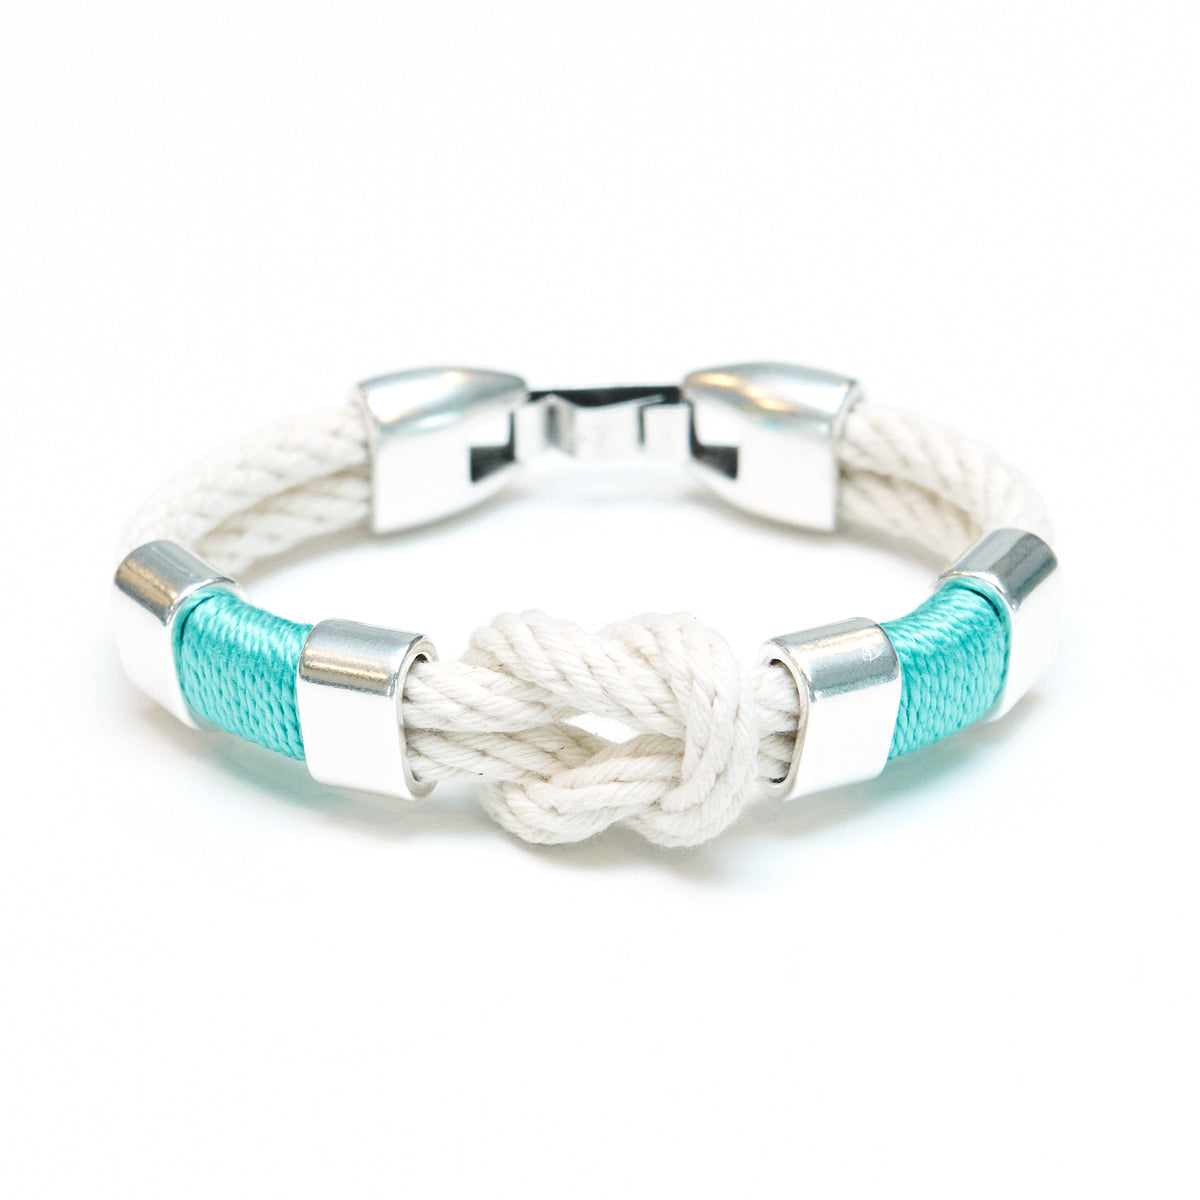 Allison Cole Jewelry - Starboard Bracelet - Ivory/ Turquoise/ Silver